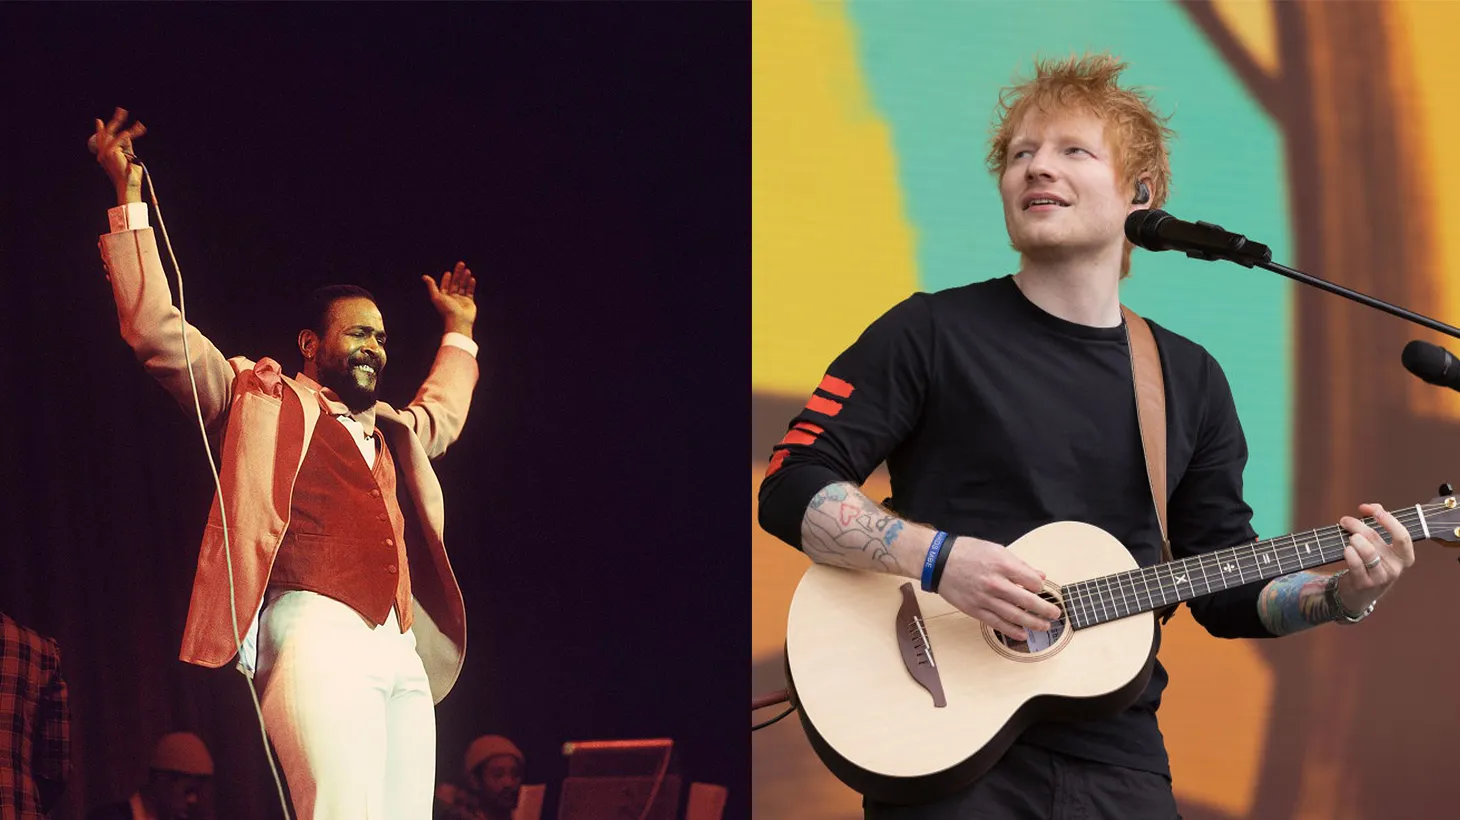 With “Thinking Out Loud,” Ed Sheeran is accused of copying the chord progression in Marvin Gaye’s “Let’s Get It On” — but he’s not backing down.